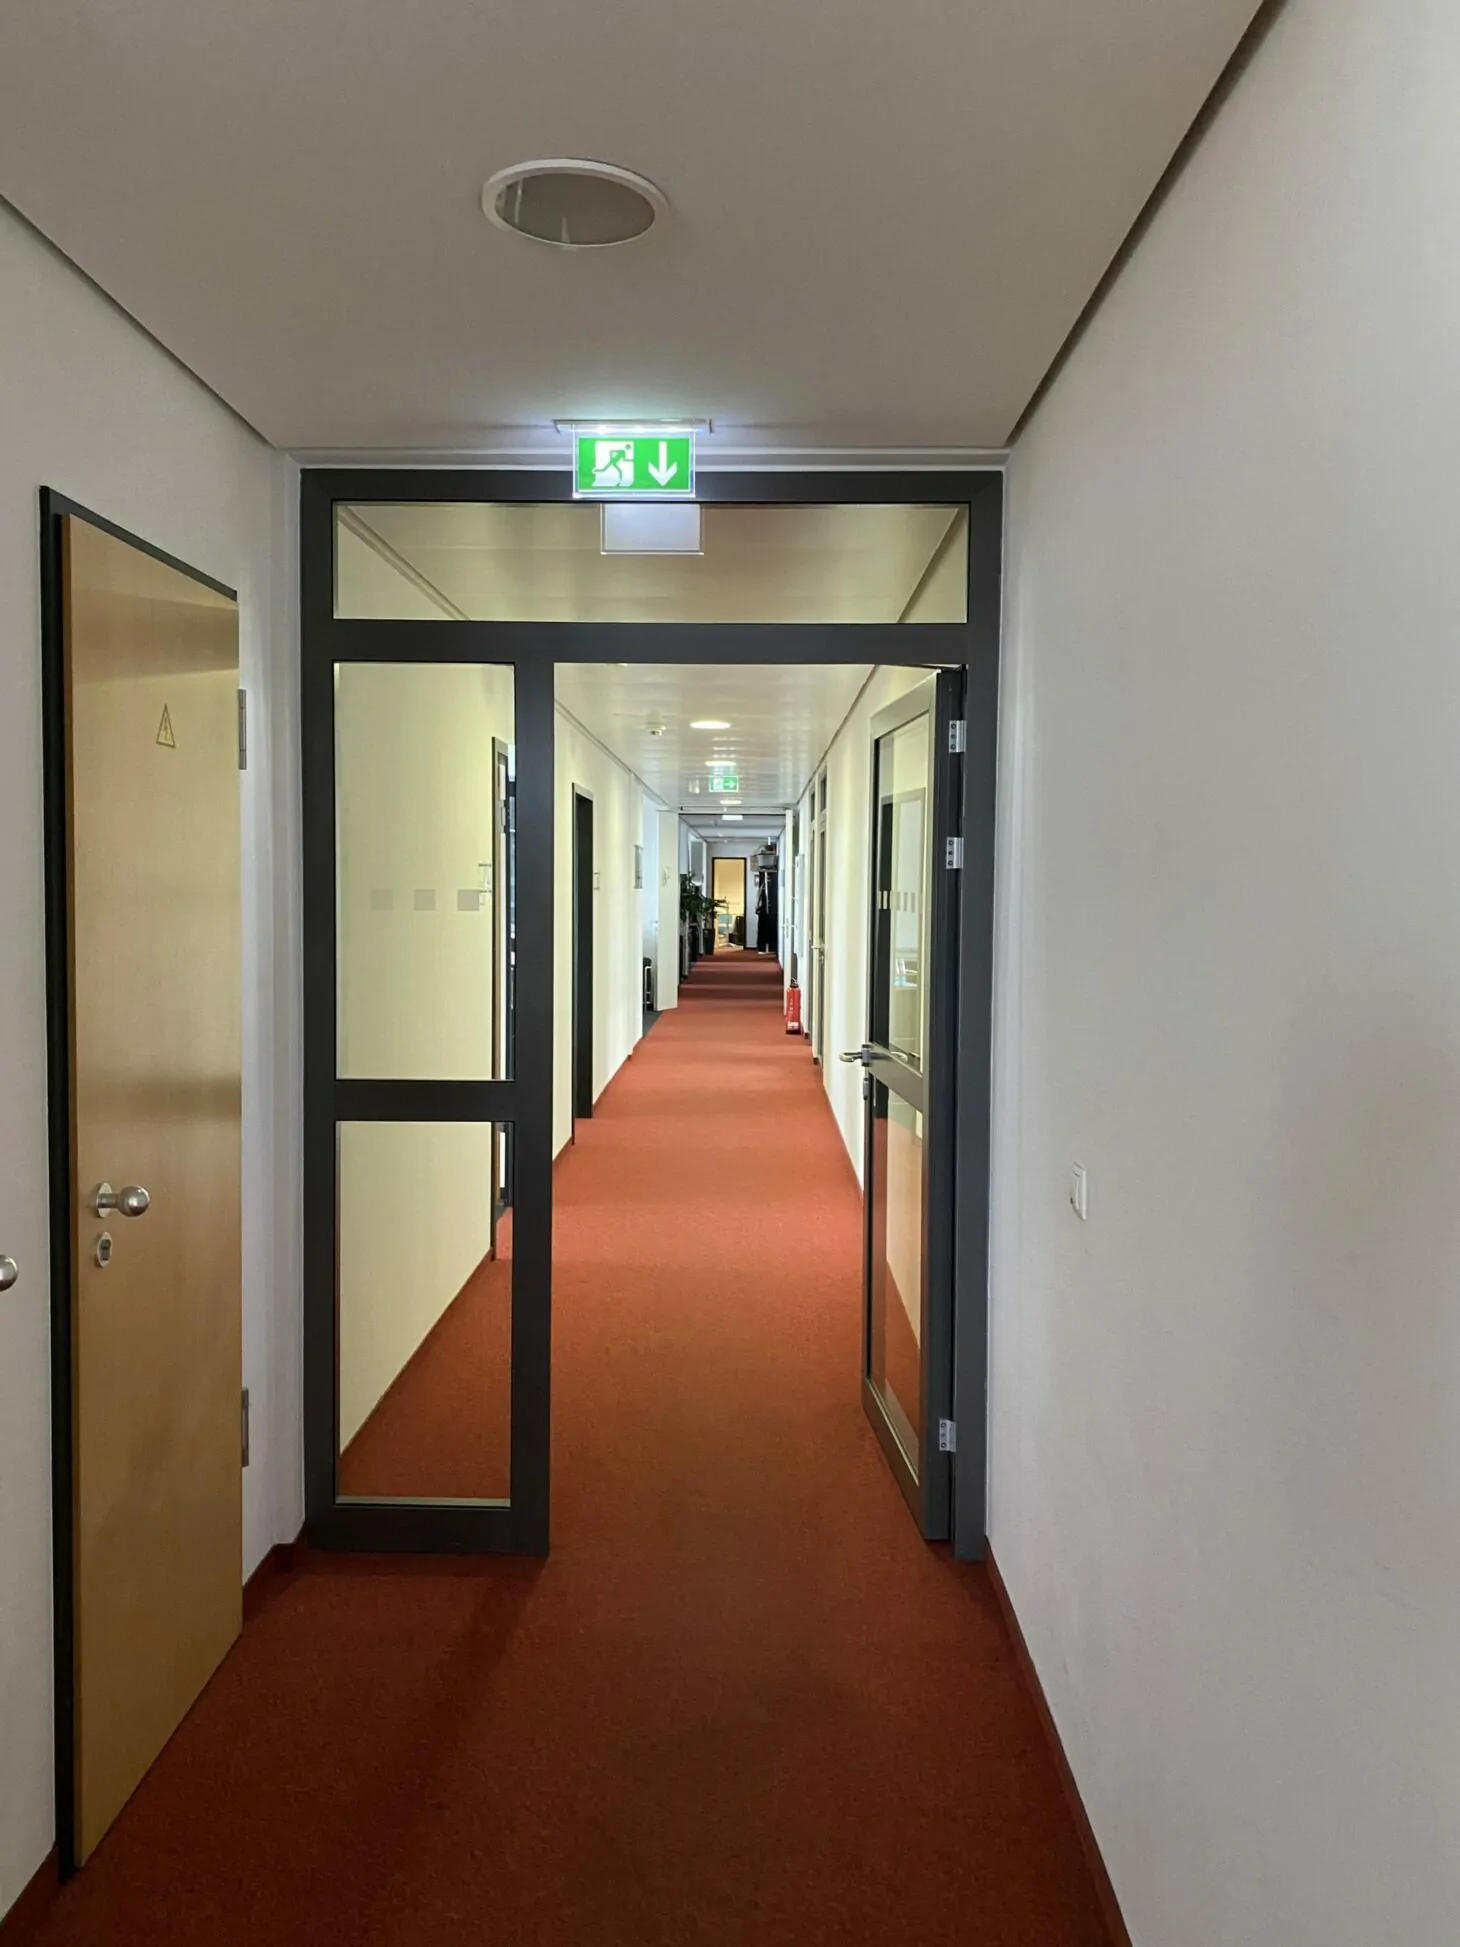 Image of a hallway with a red carpet, valantic branch in Frankfurt am Main